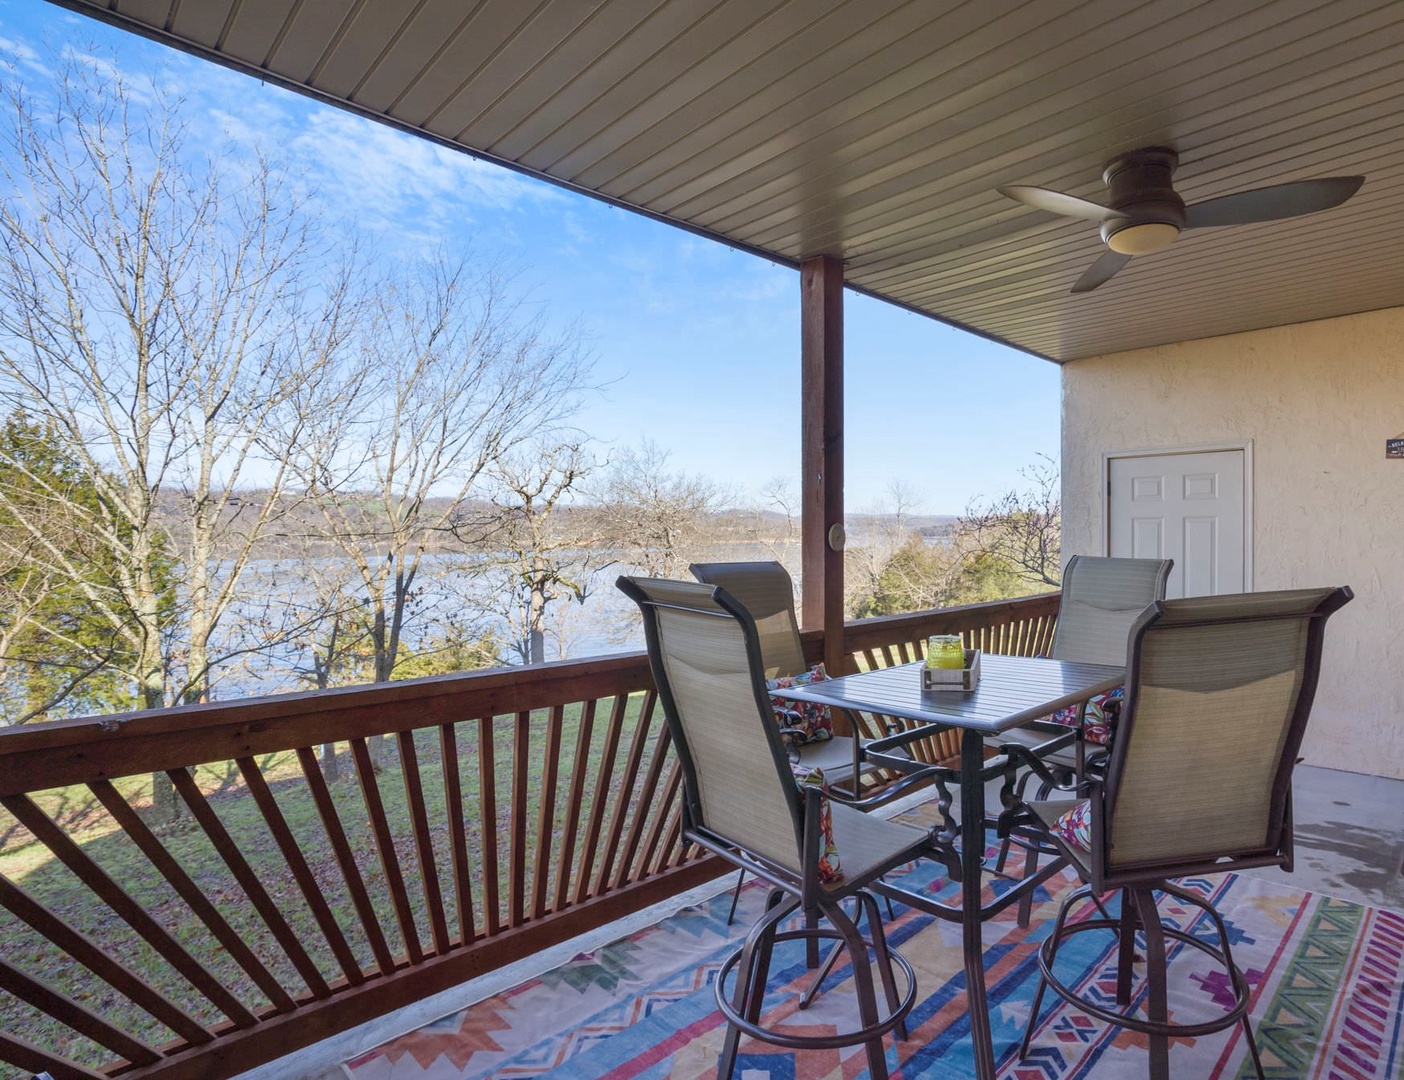 Beautiful lake view from back deck with outdoor seating